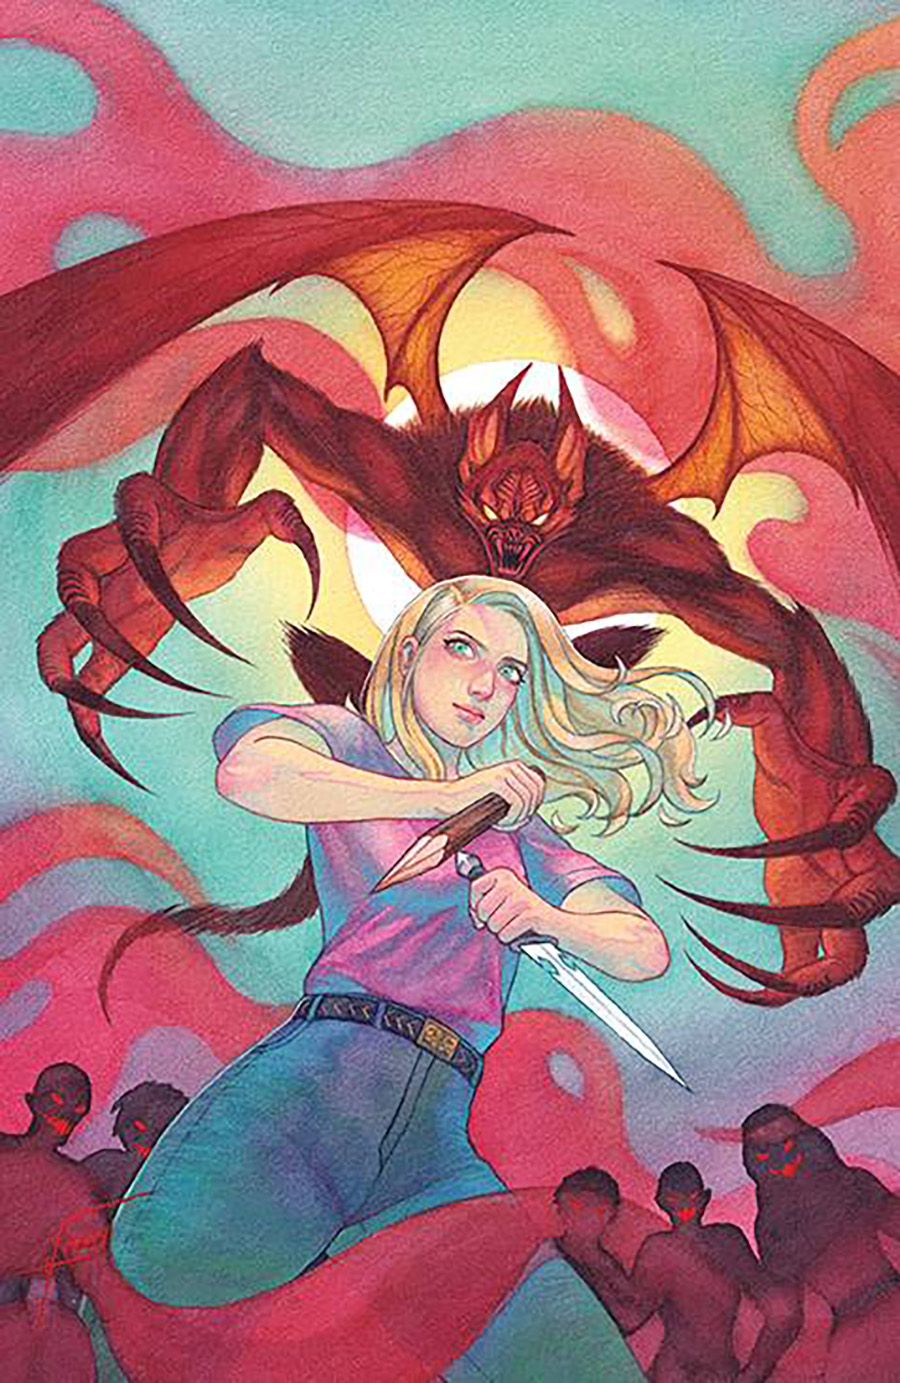 Buffy The Vampire Slayer 25th Anniversary Special #1 (One Shot) Cover H Incentive Frany Virgin Cover